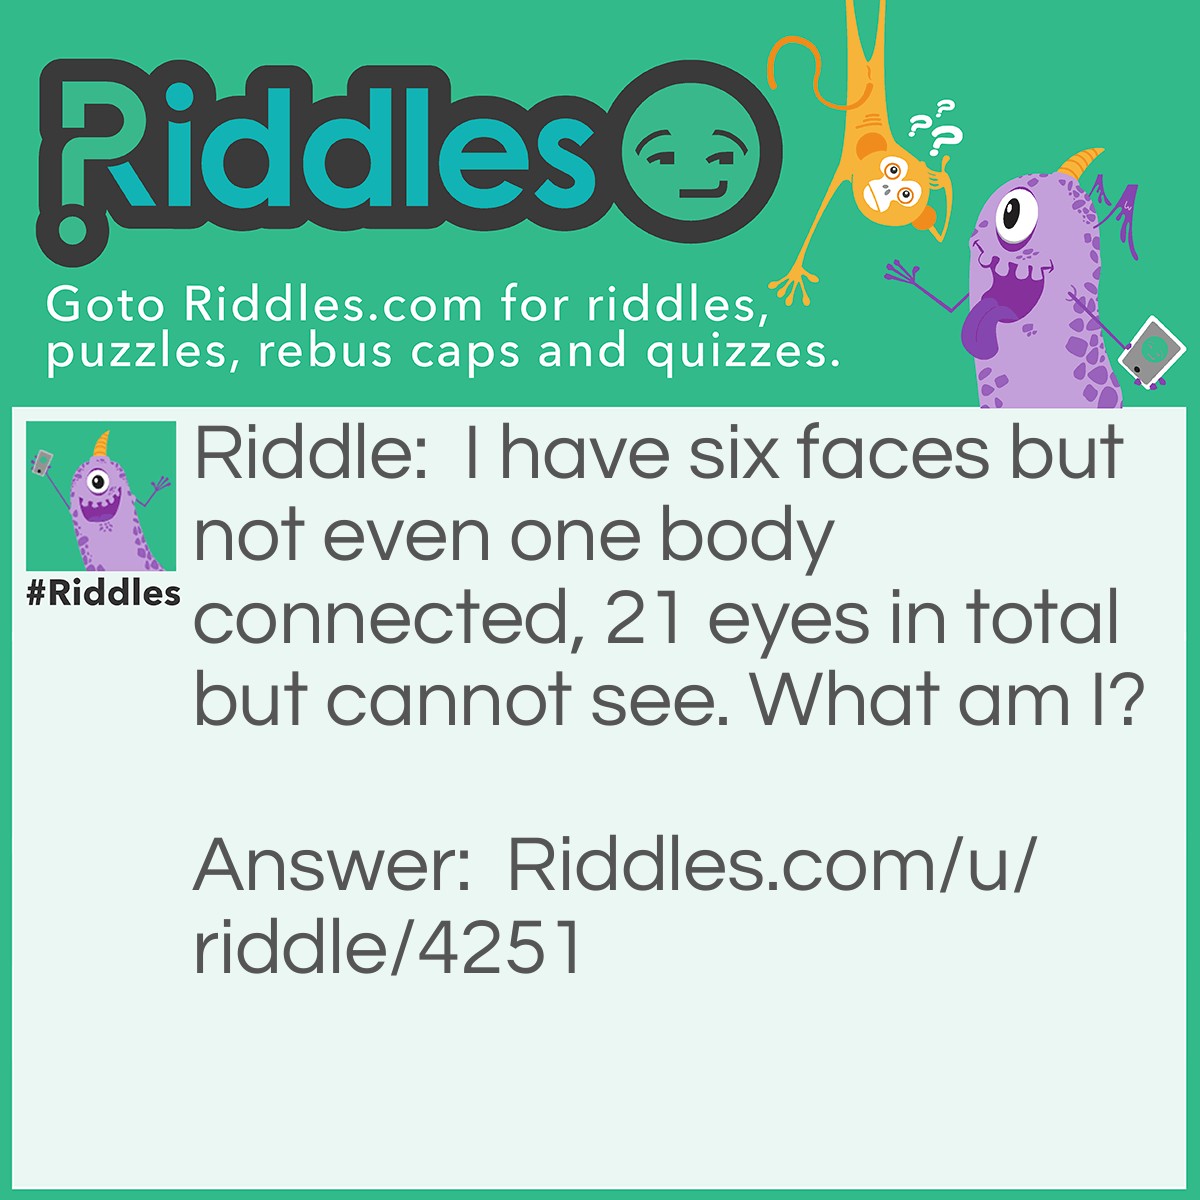 Riddle: I have six faces but not even one body connected, 21 eyes in total but cannot see. What am I? Answer: A die/dice.